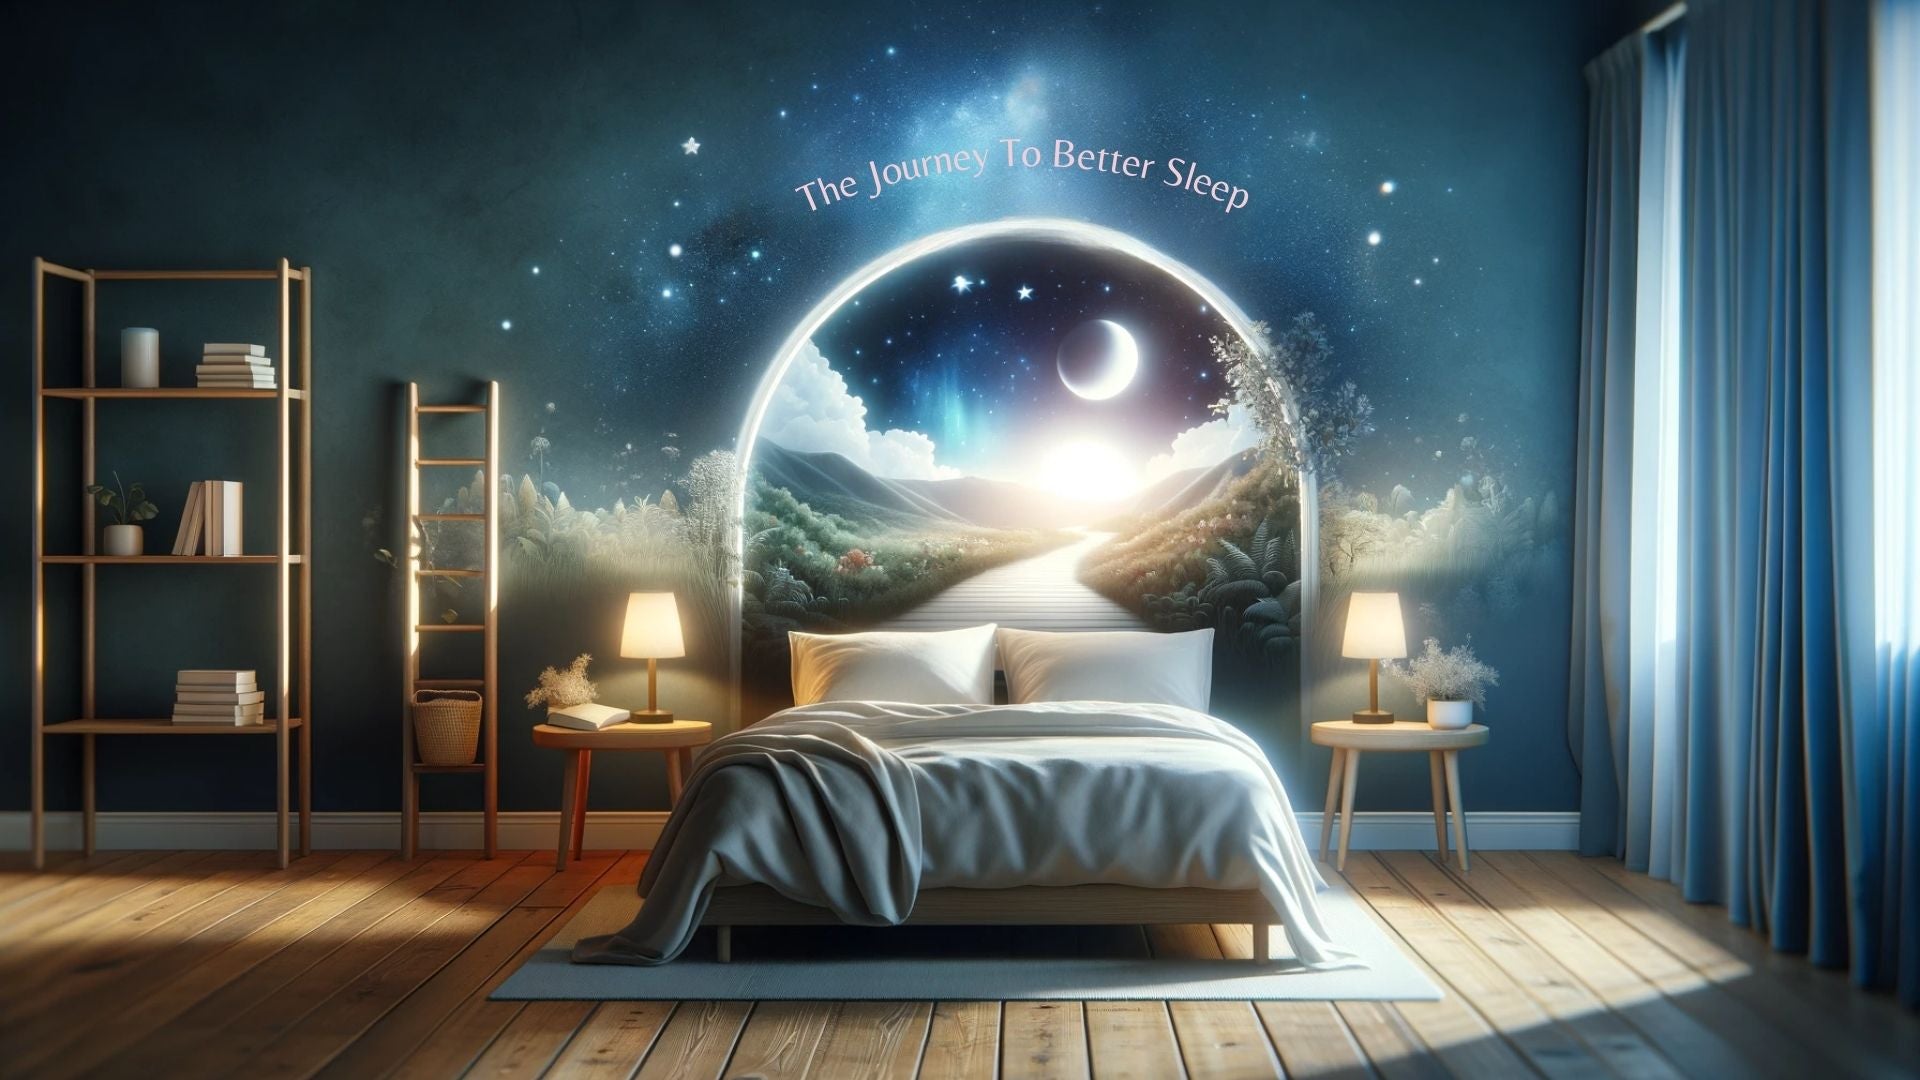 An image depicting 'The Journey to Better Sleep', showing a serene and inviting bedroom scene that symbolizes the quest for improved sleep quality.